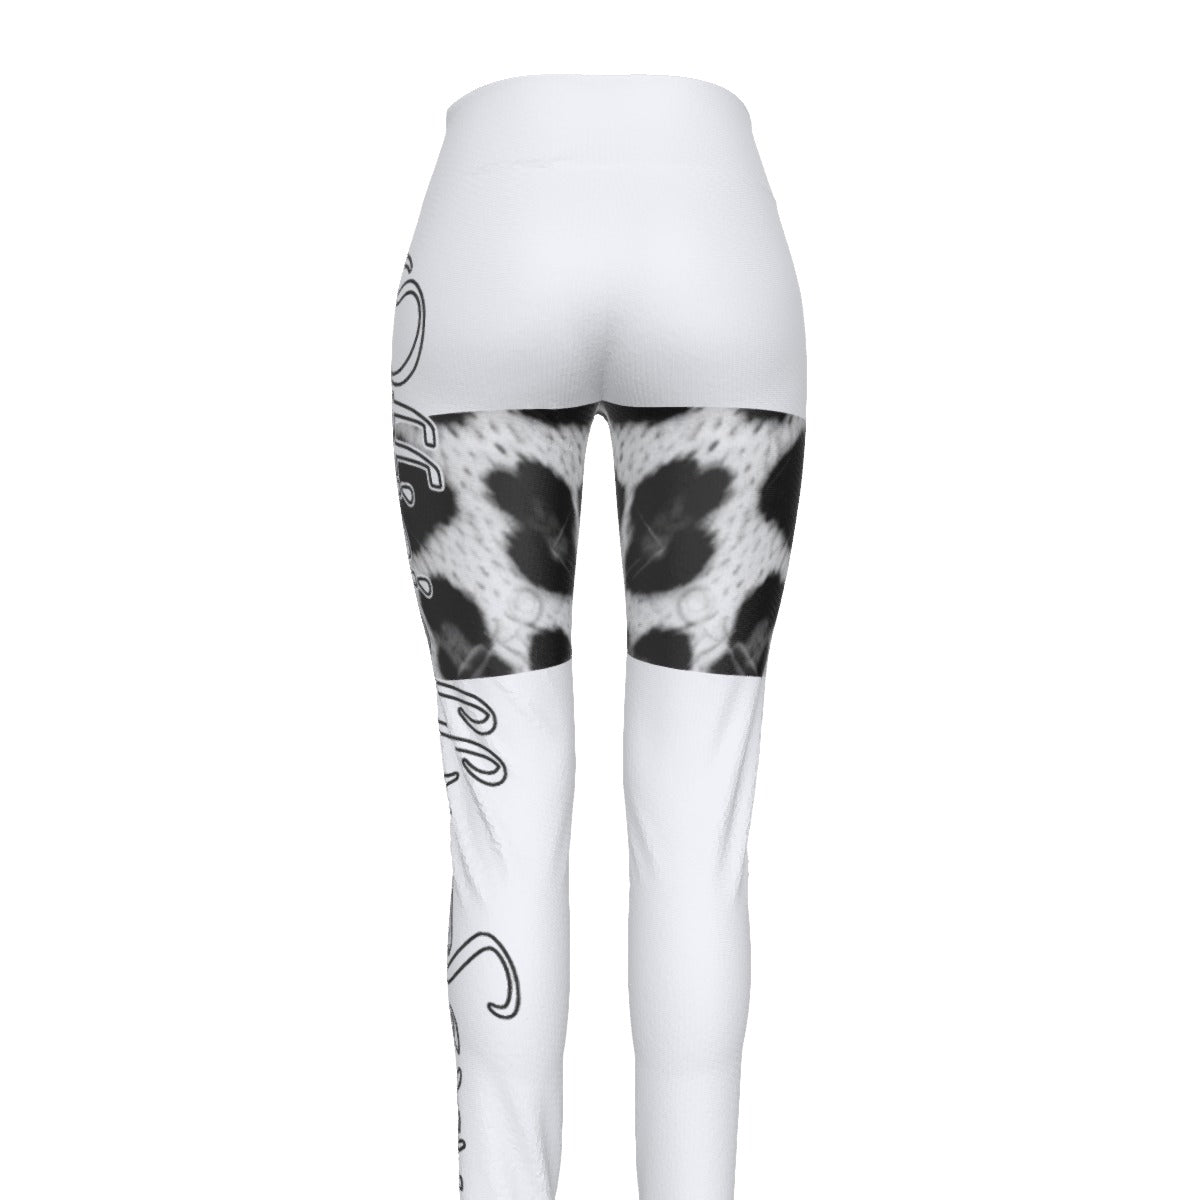 Officially Sexy Snow Leopard Print Collection Women's White High Waist Thigh High Booty Popper Leggings #2 With OS On Front Thighs Only (English) 3